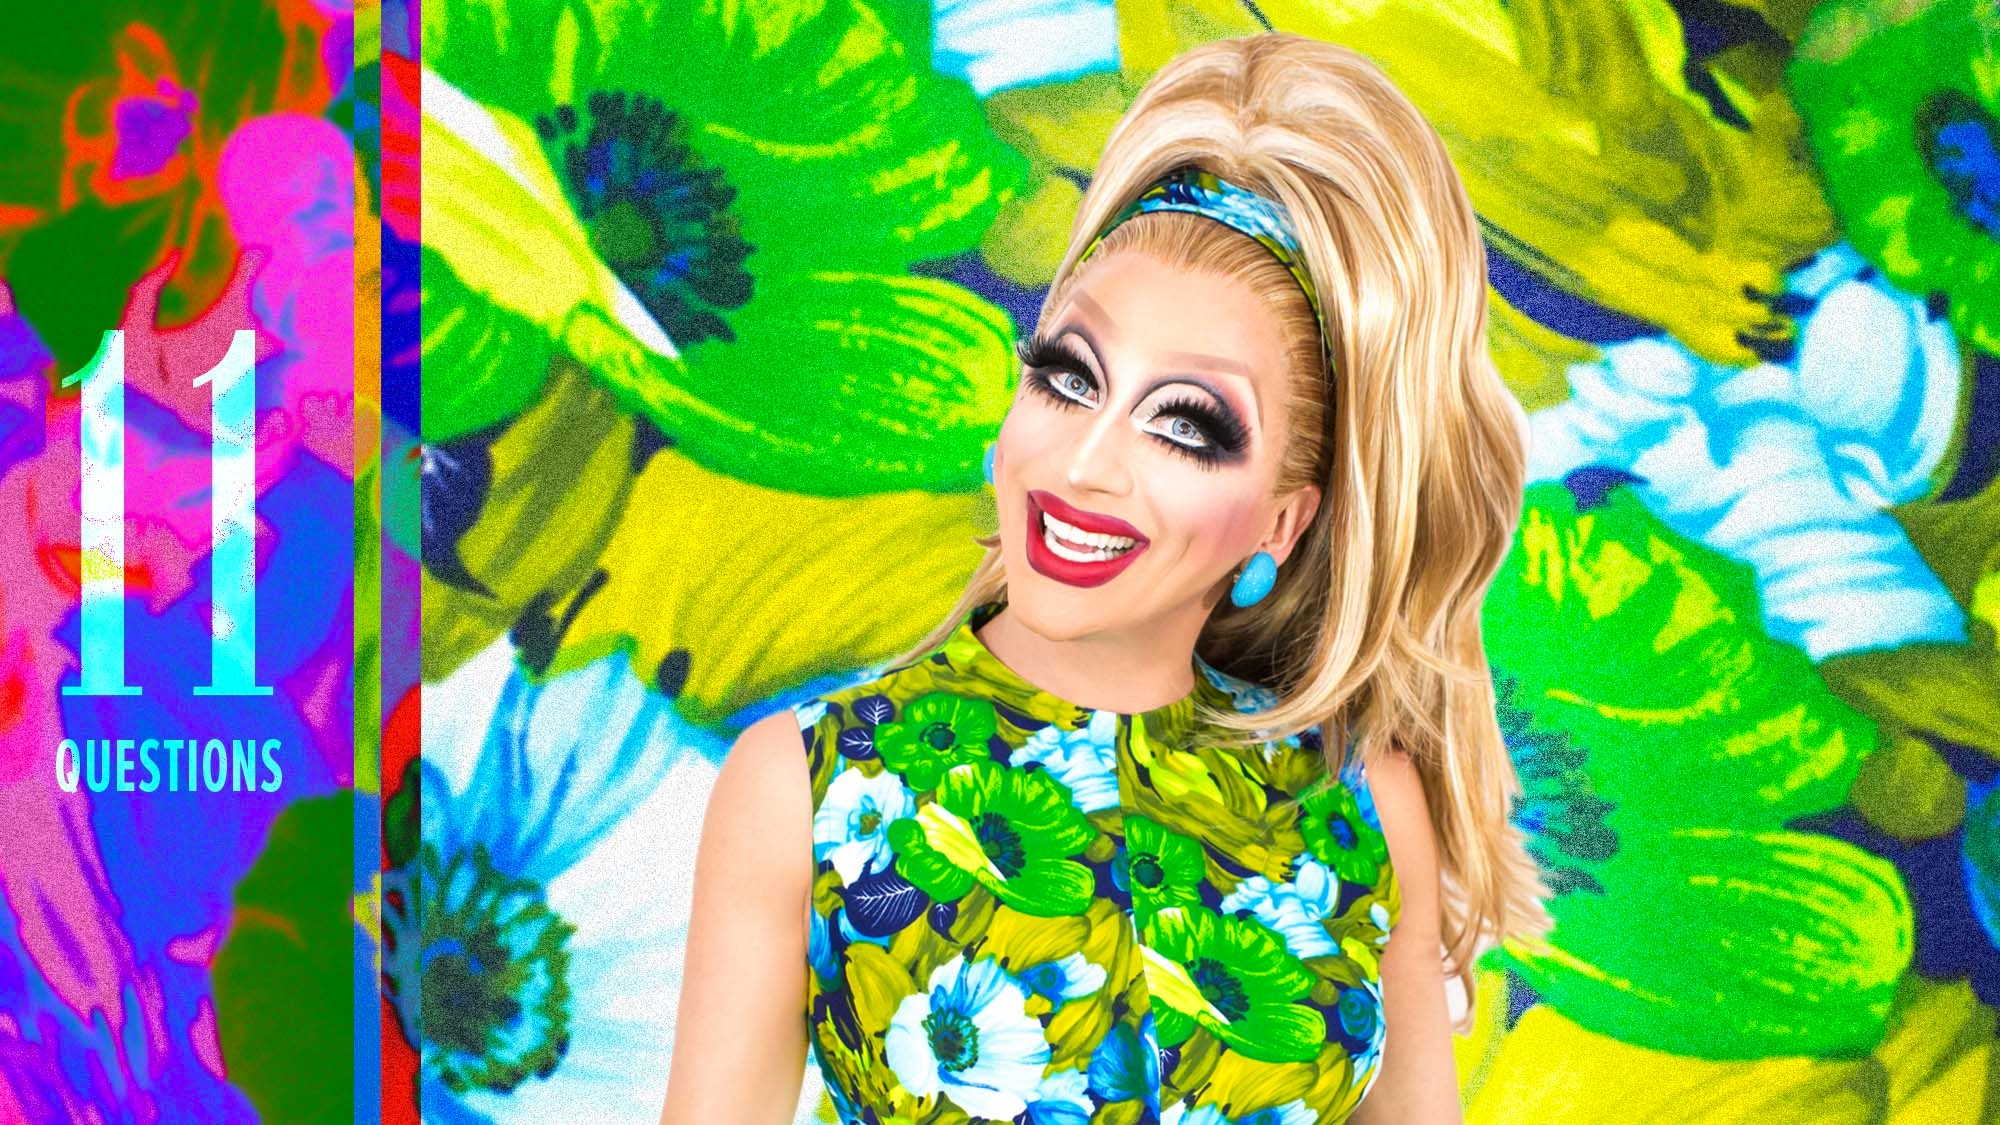 RuPaul’s Drag Race winner Bianca Del Rio on selling shoes, and the history of male-presenting drag performers